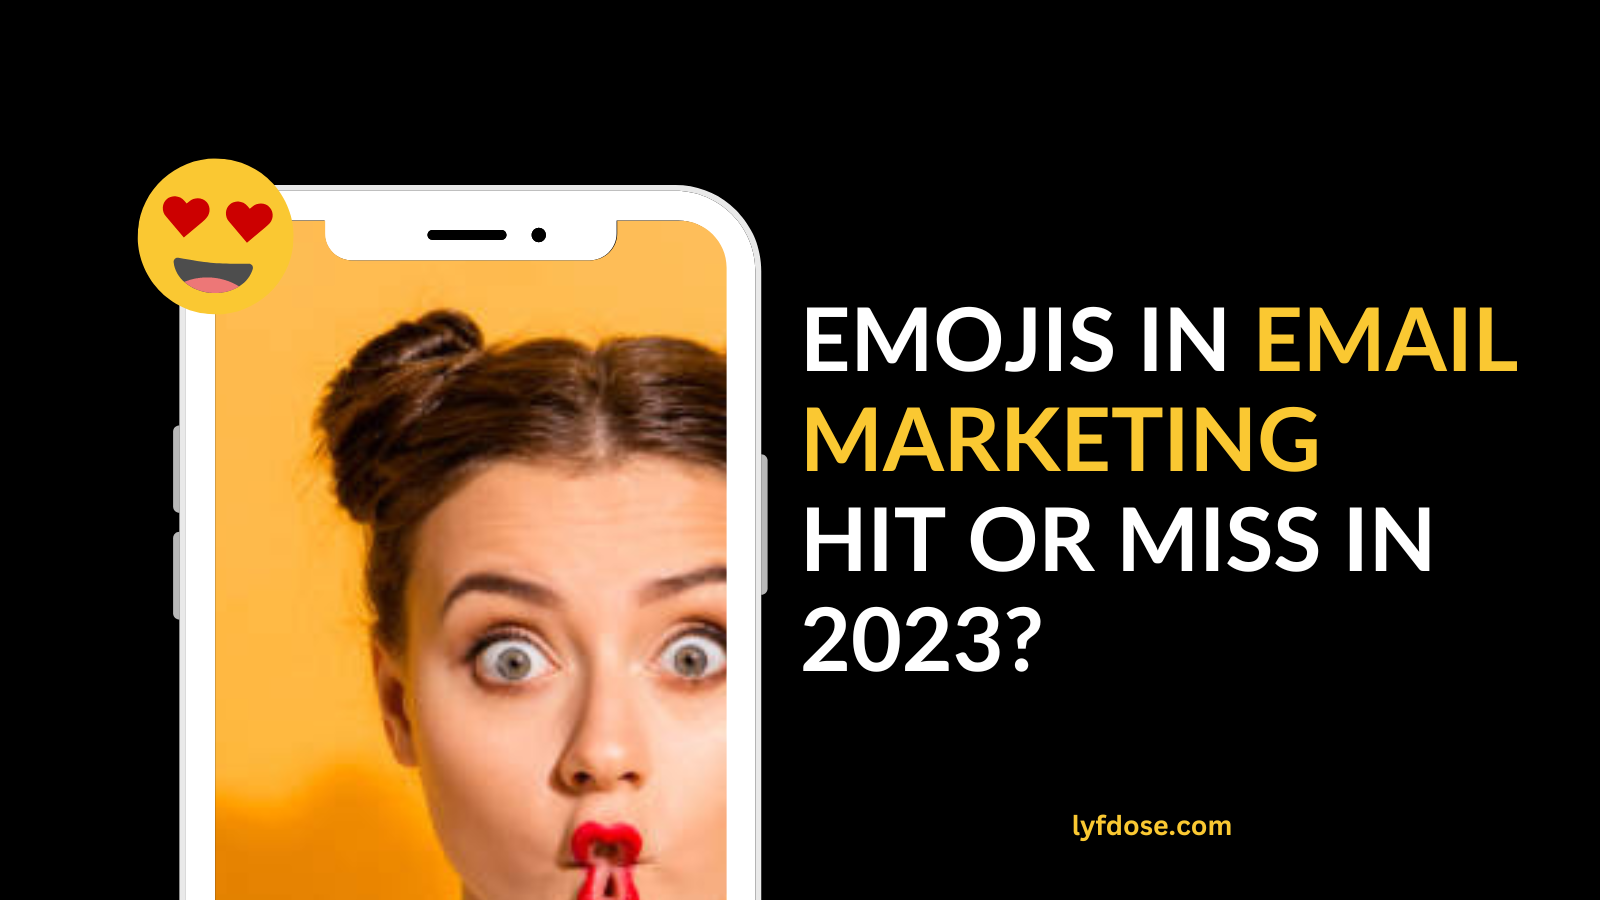 How to effectively use emojis in email marketing